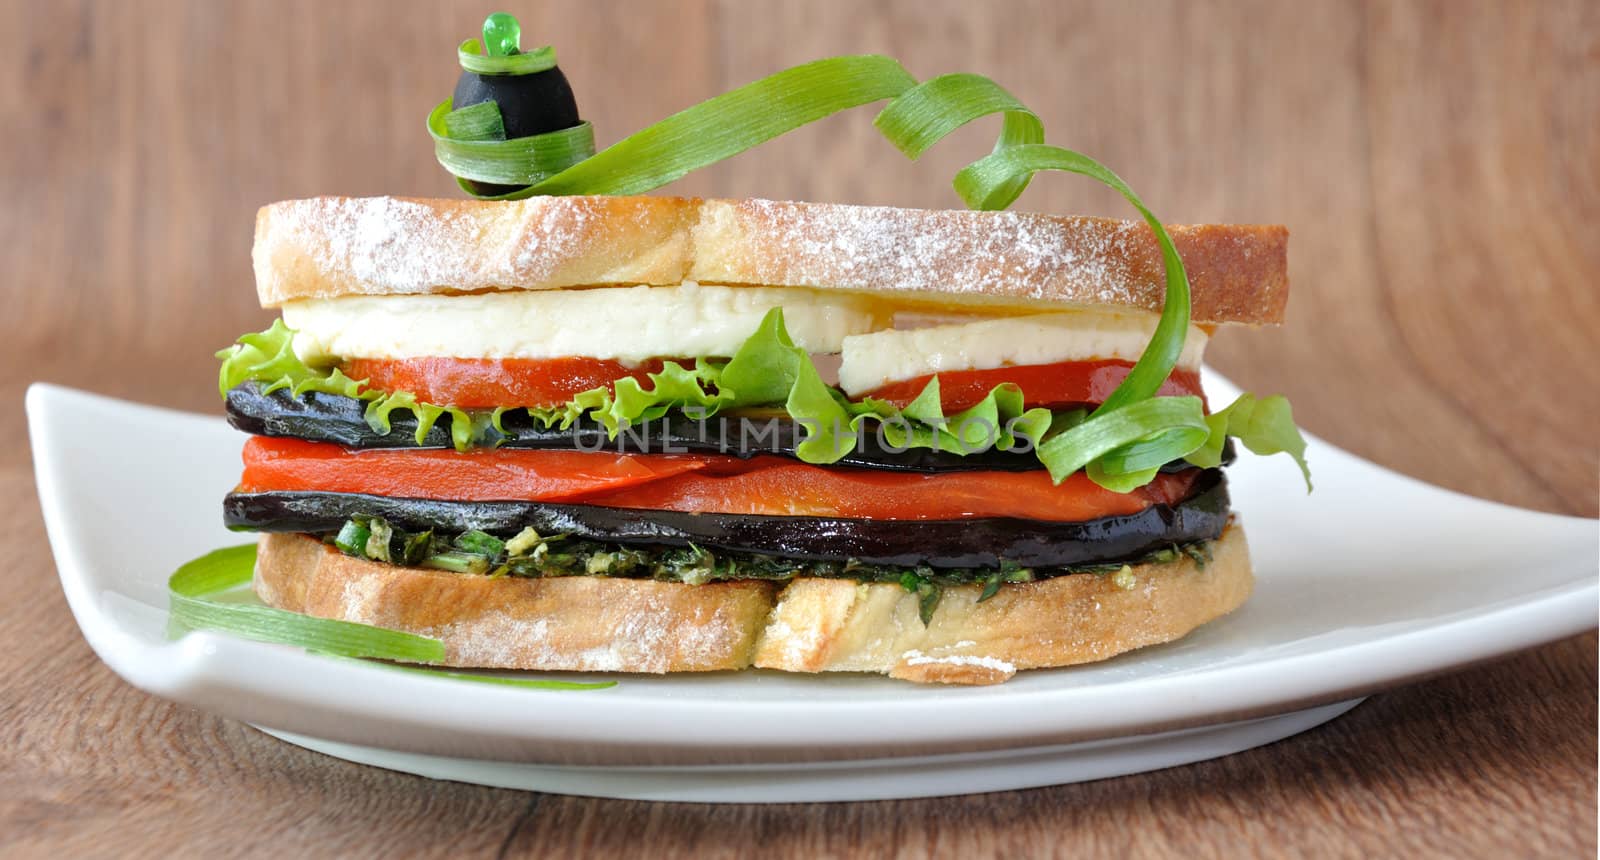 Sandwich with eggplant by Apolonia